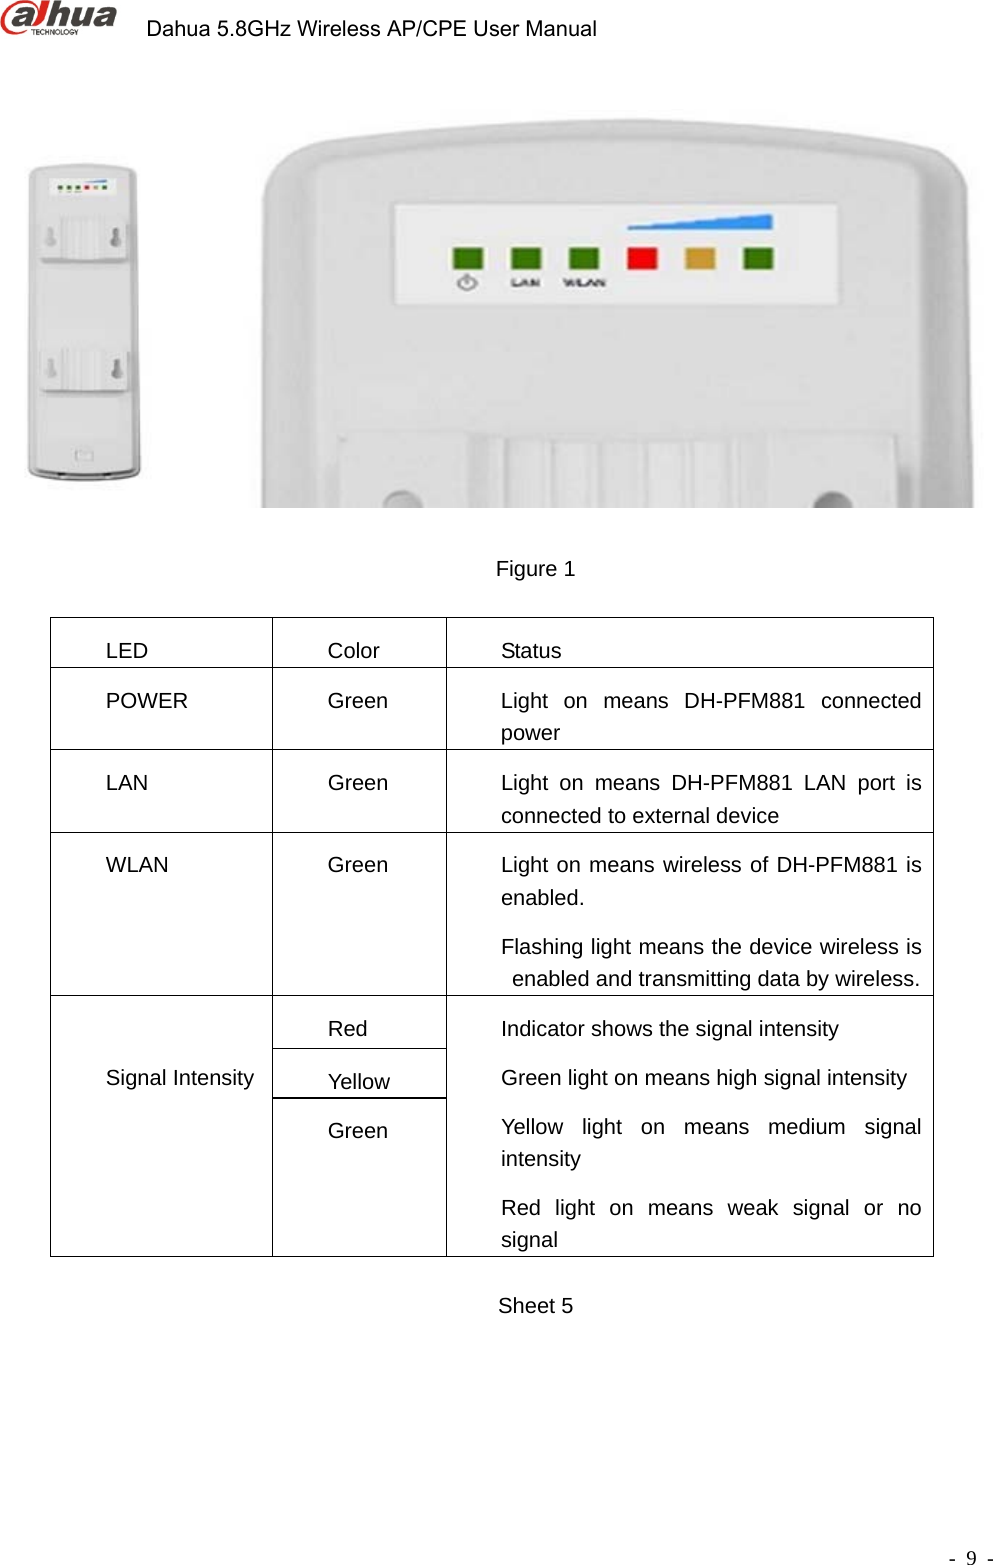             Dahua 5.8GHz Wireless AP/CPE User Manual      - 9 -   Figure 1  LED Color  Status  POWER  Green   Light on means DH-PFM881 connected power  LAN  Green   Light on means DH-PFM881 LAN port is connected to external device   WLAN  Green   Light on means wireless of DH-PFM881 is enabled. Flashing light means the device wireless is enabled and transmitting data by wireless. Signal Intensity   Red  Indicator shows the signal intensity   Green light on means high signal intensity Yellow light on means medium signal intensity Red light on means weak signal or no signal Yellow Green   Sheet 5  